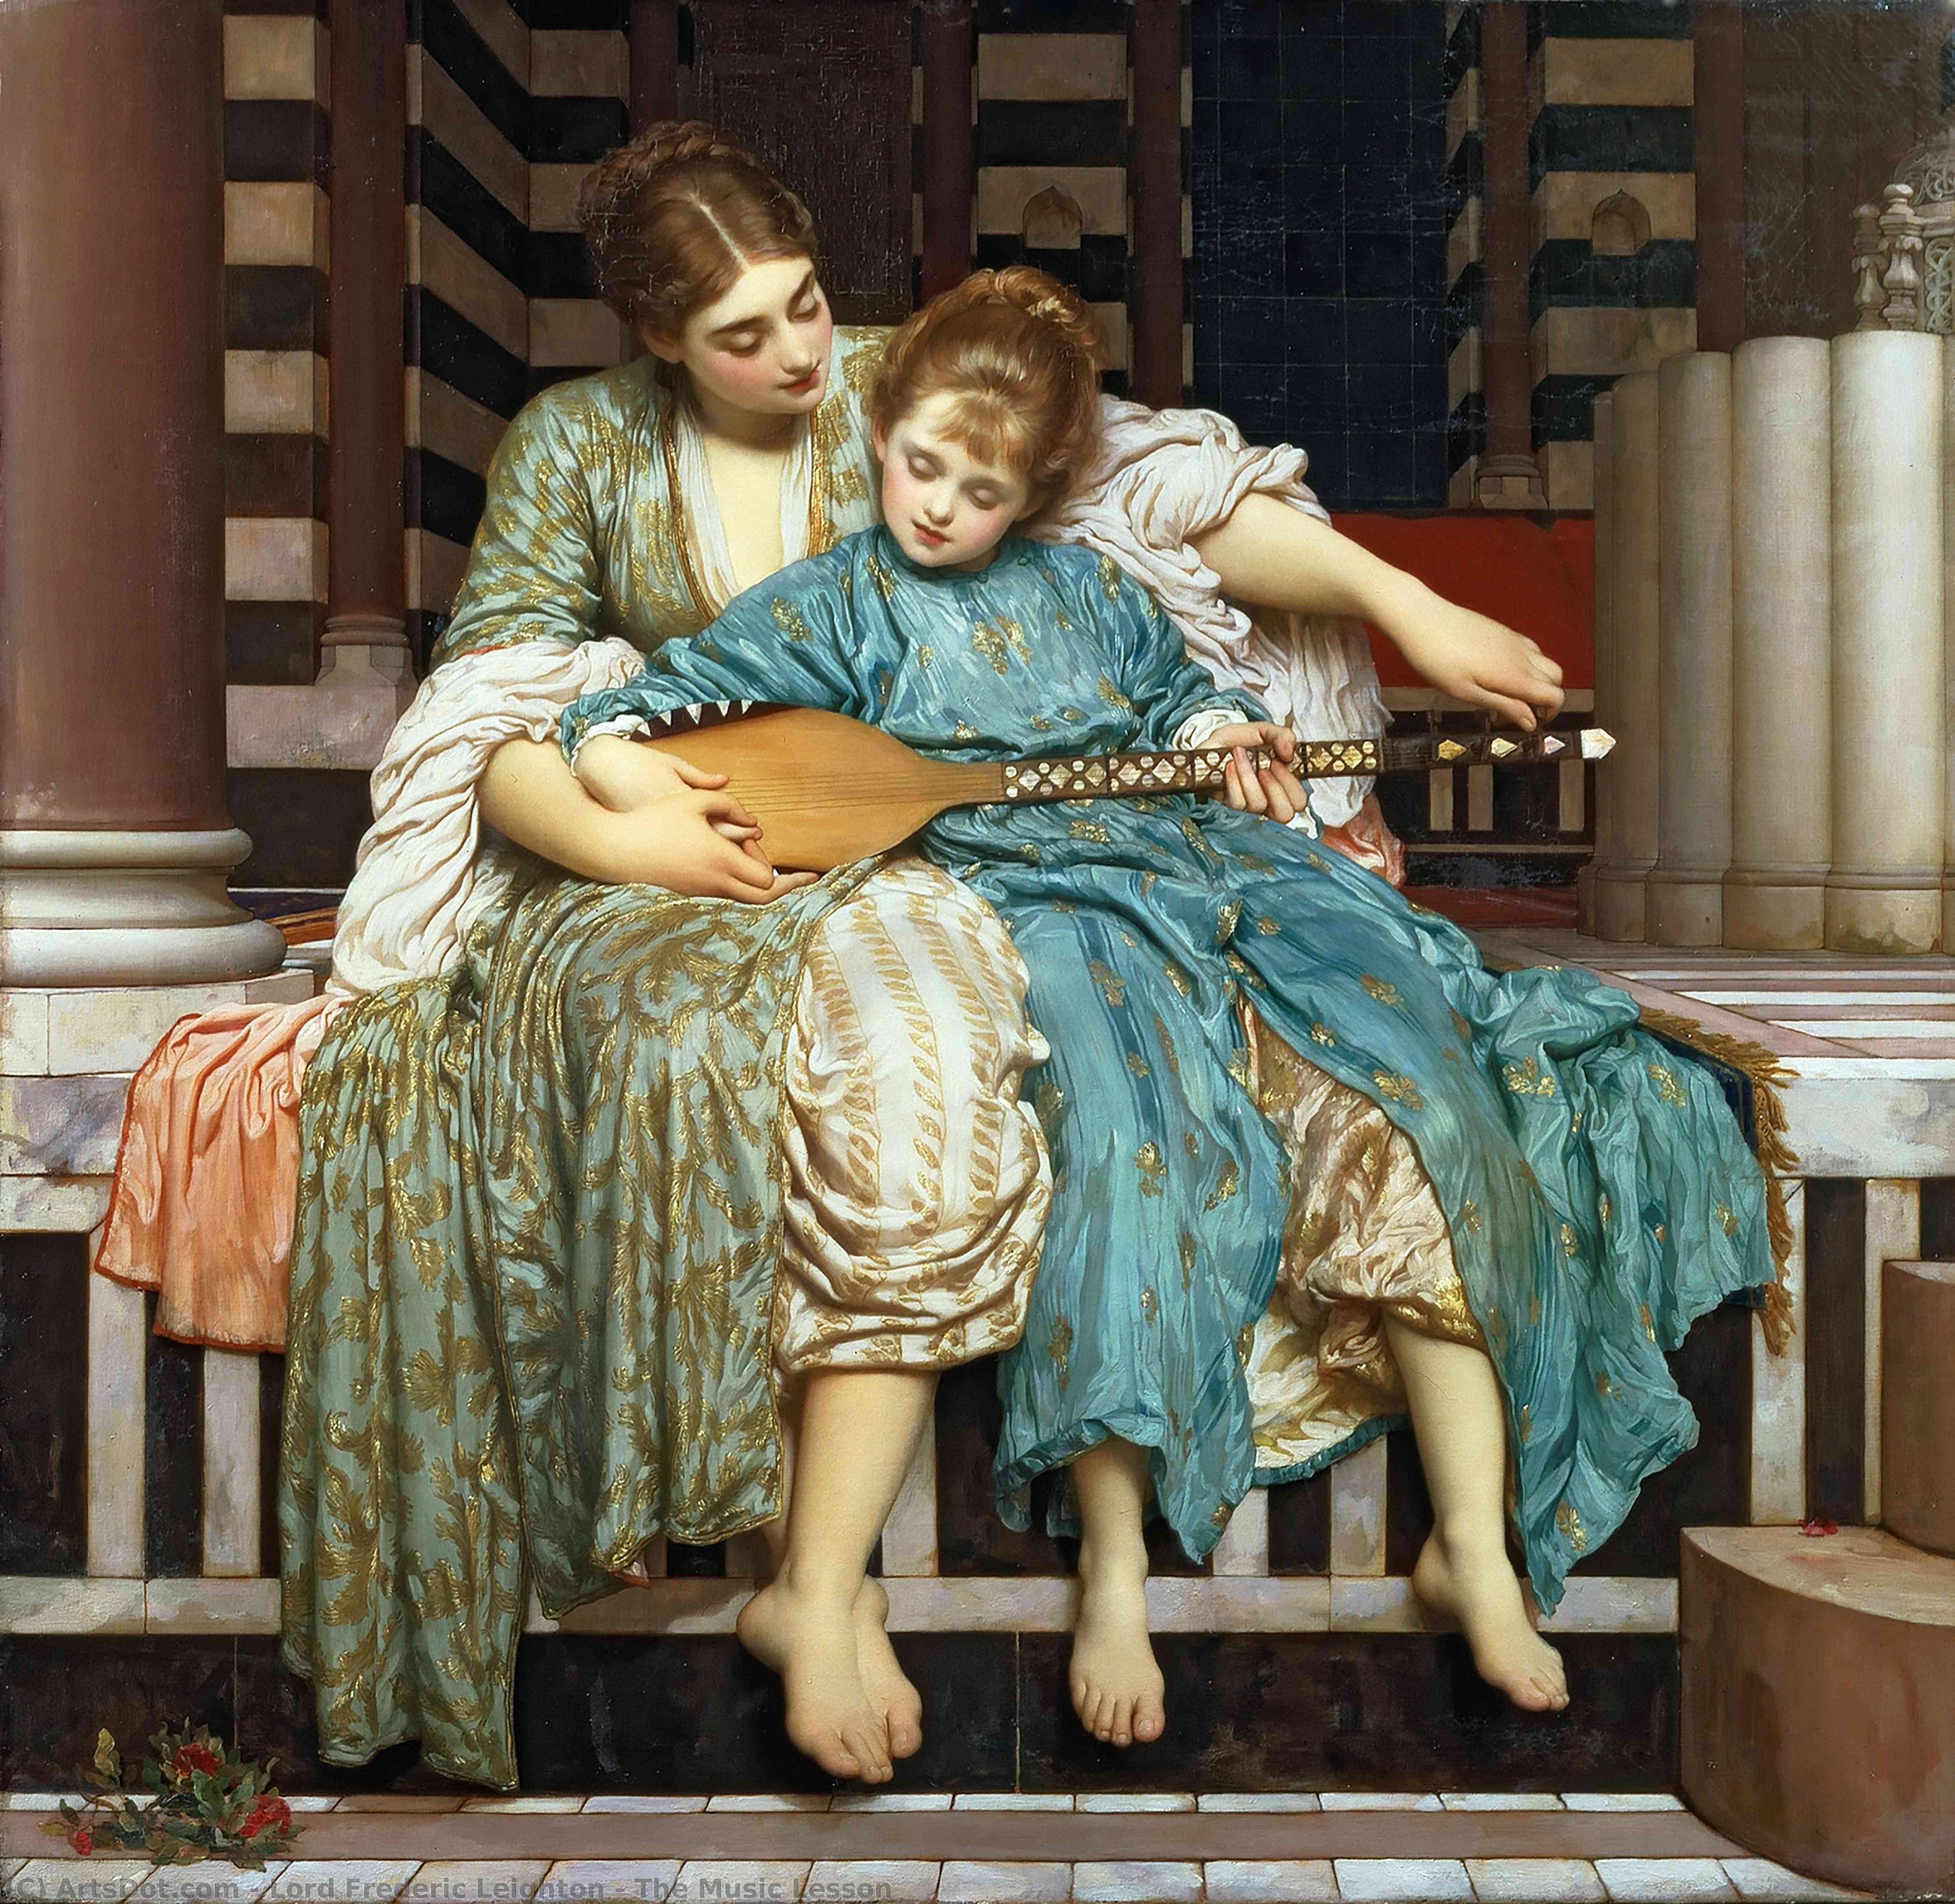 Buy Museum Art Reproductions The Music Lesson, 1877 by Lord Frederic Leighton | ArtsDot.com